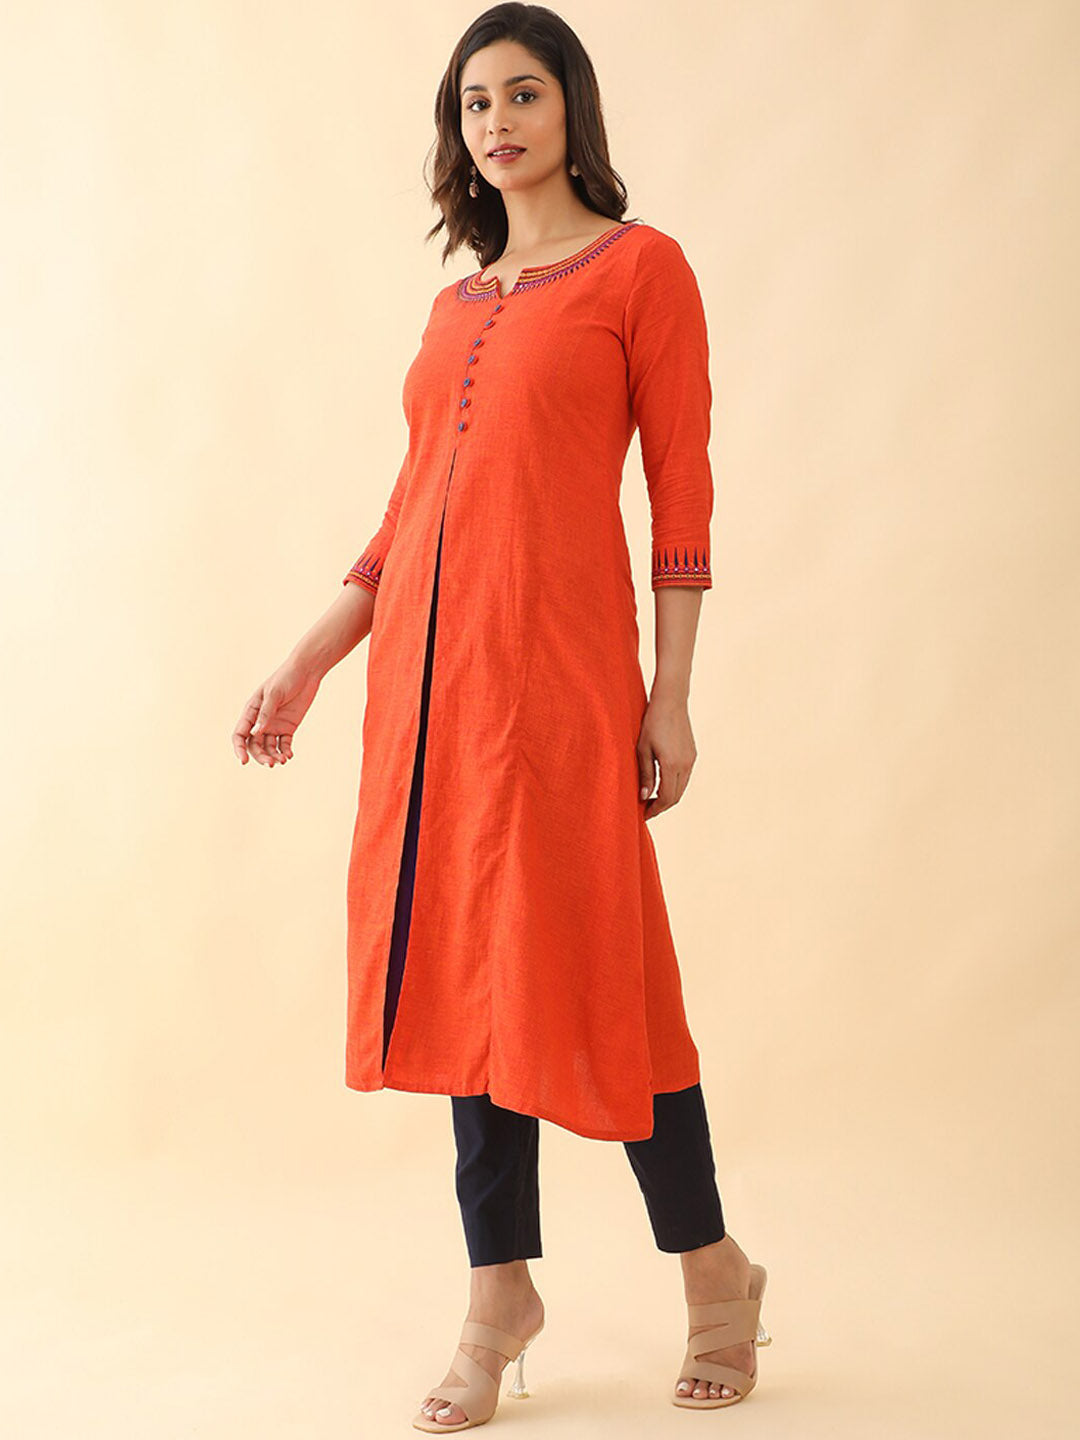 Jewelled Embroidered With Contrast Front Slit Kurta - Orange